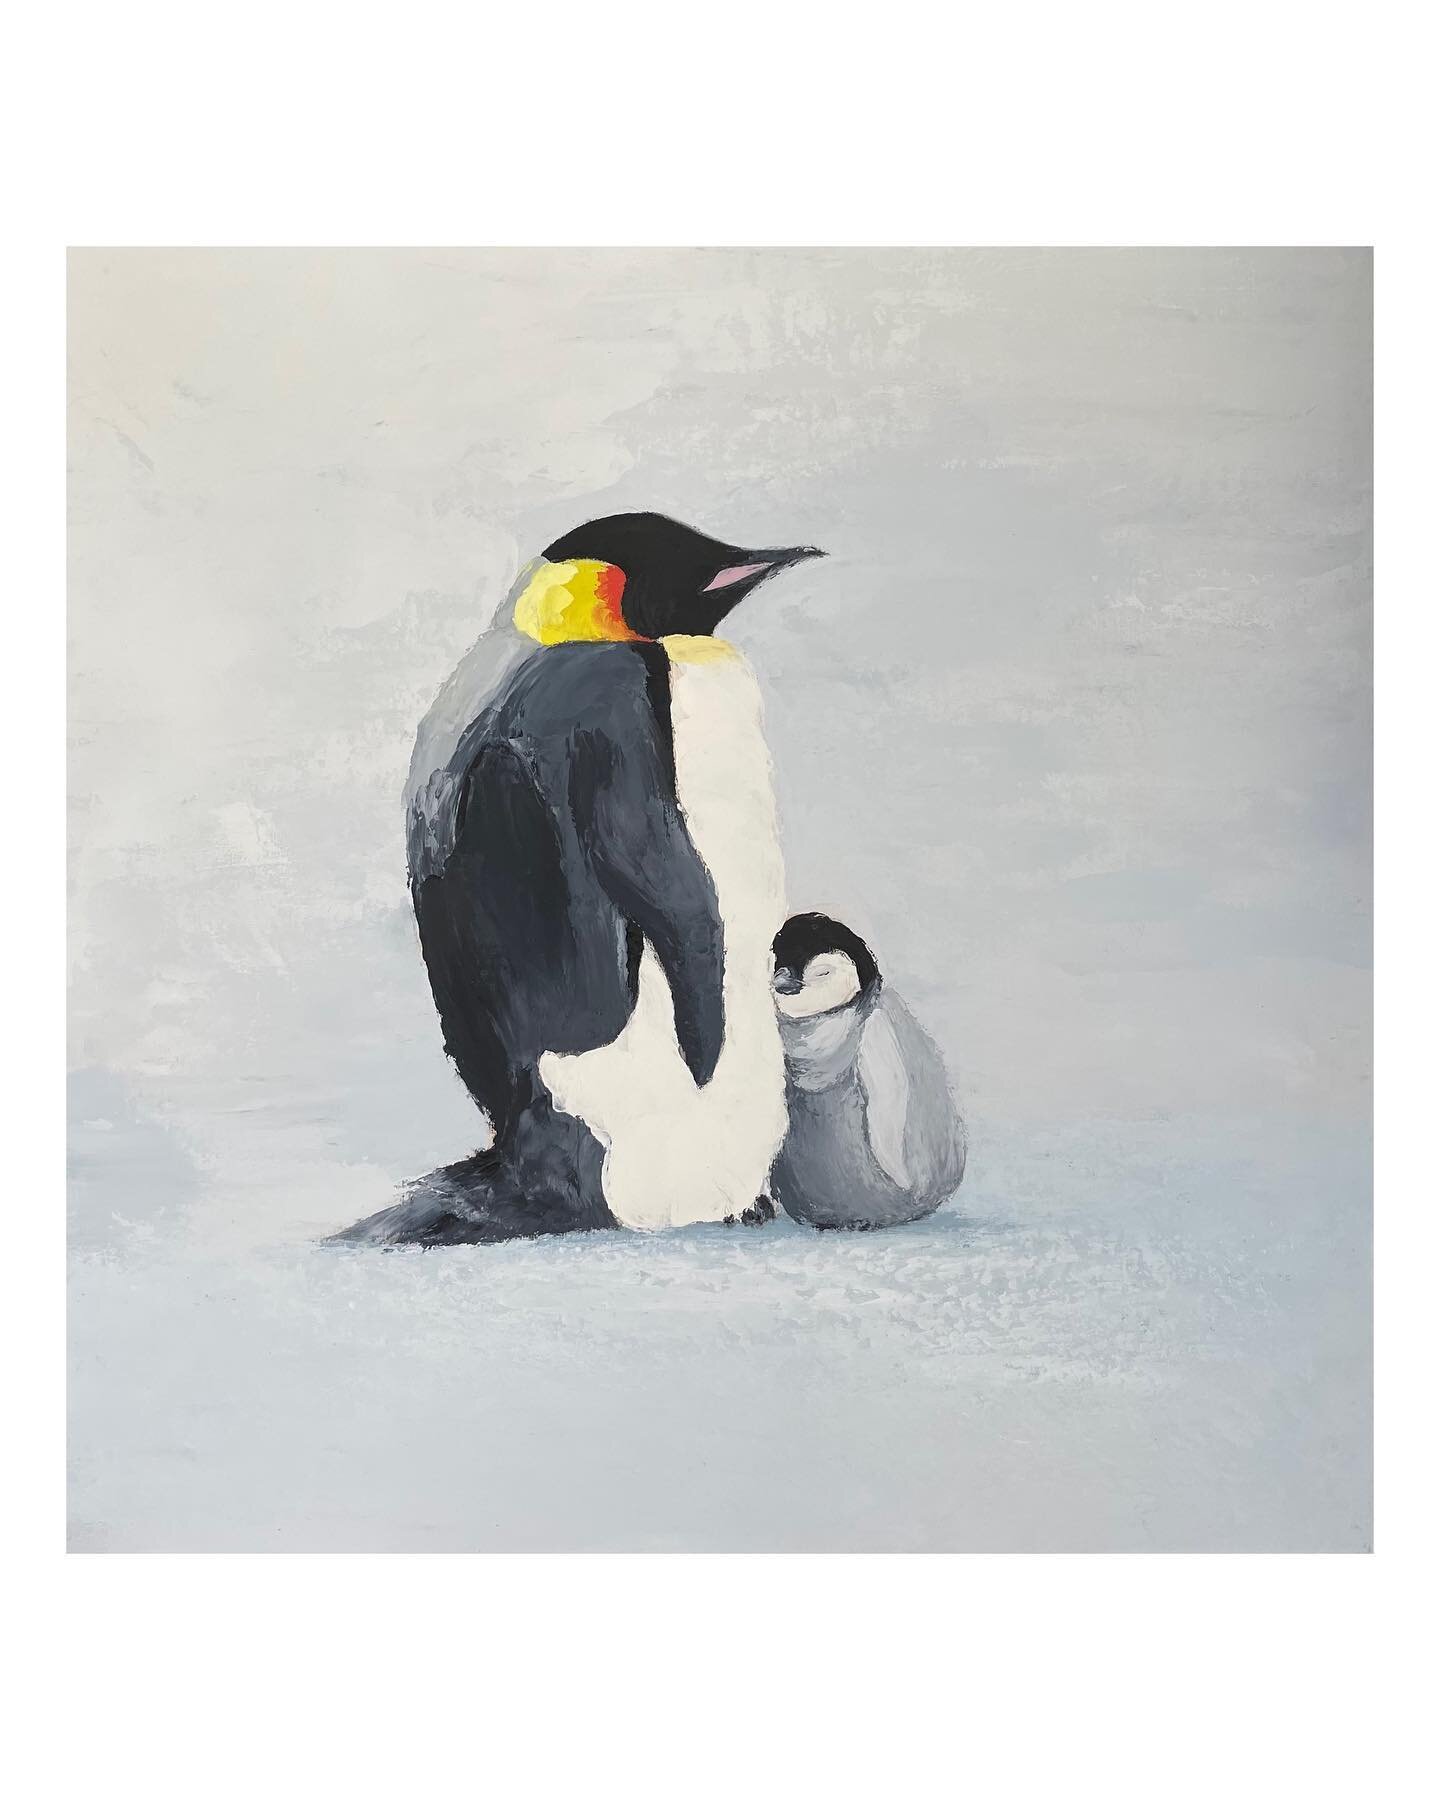 Happy World Penguin Day. 🐧

&ldquo;A Secure Base&rdquo;
20&rdquo; x 20&rdquo;
Cold wax and oil on wood board
Available 

#worldpenguinday